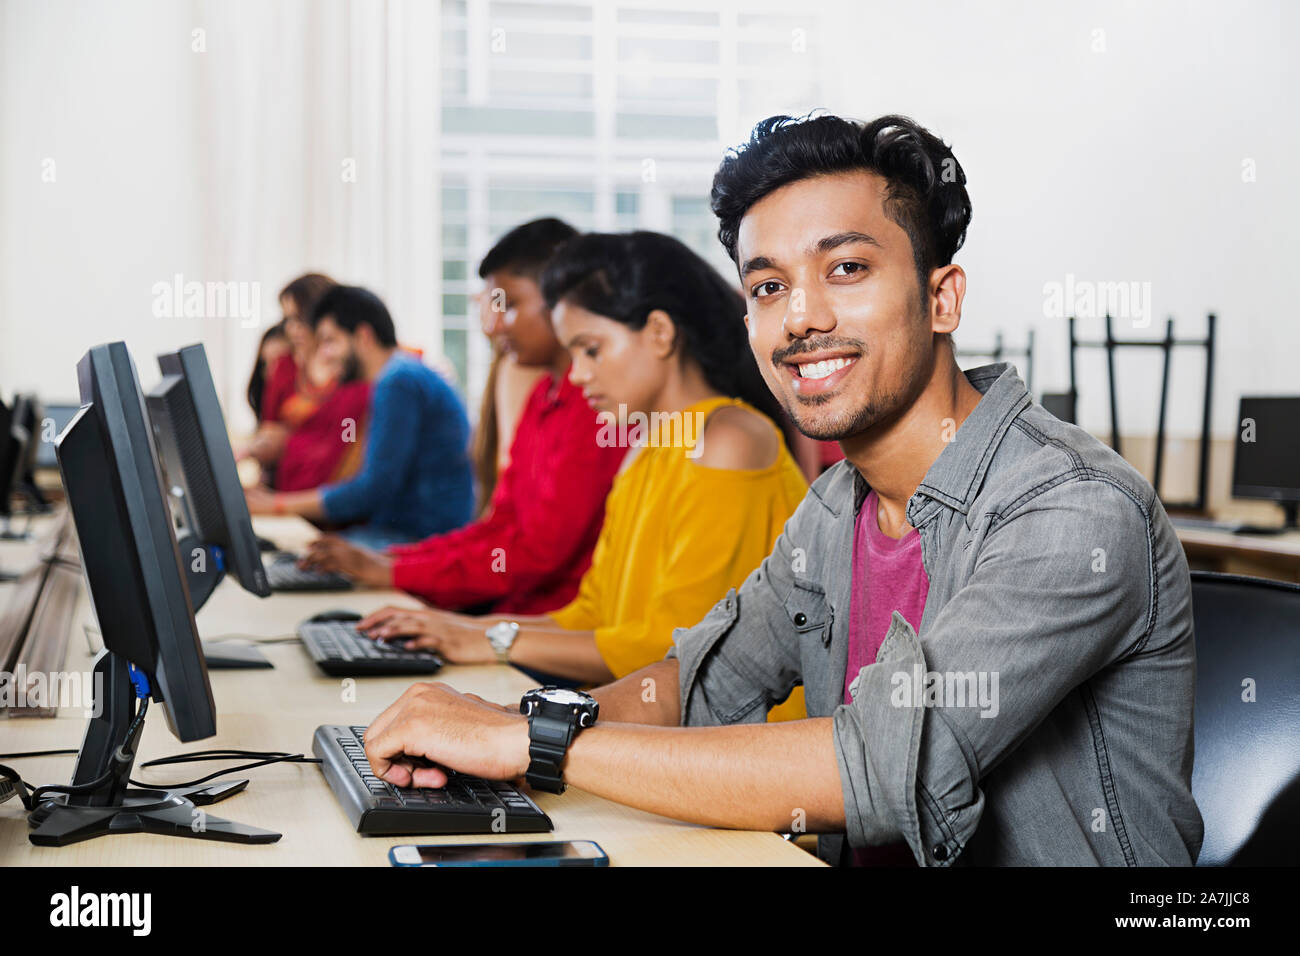 Young Male College Student Using Computer Studying E-Learning Education With Students In Computer Class Stock Photo